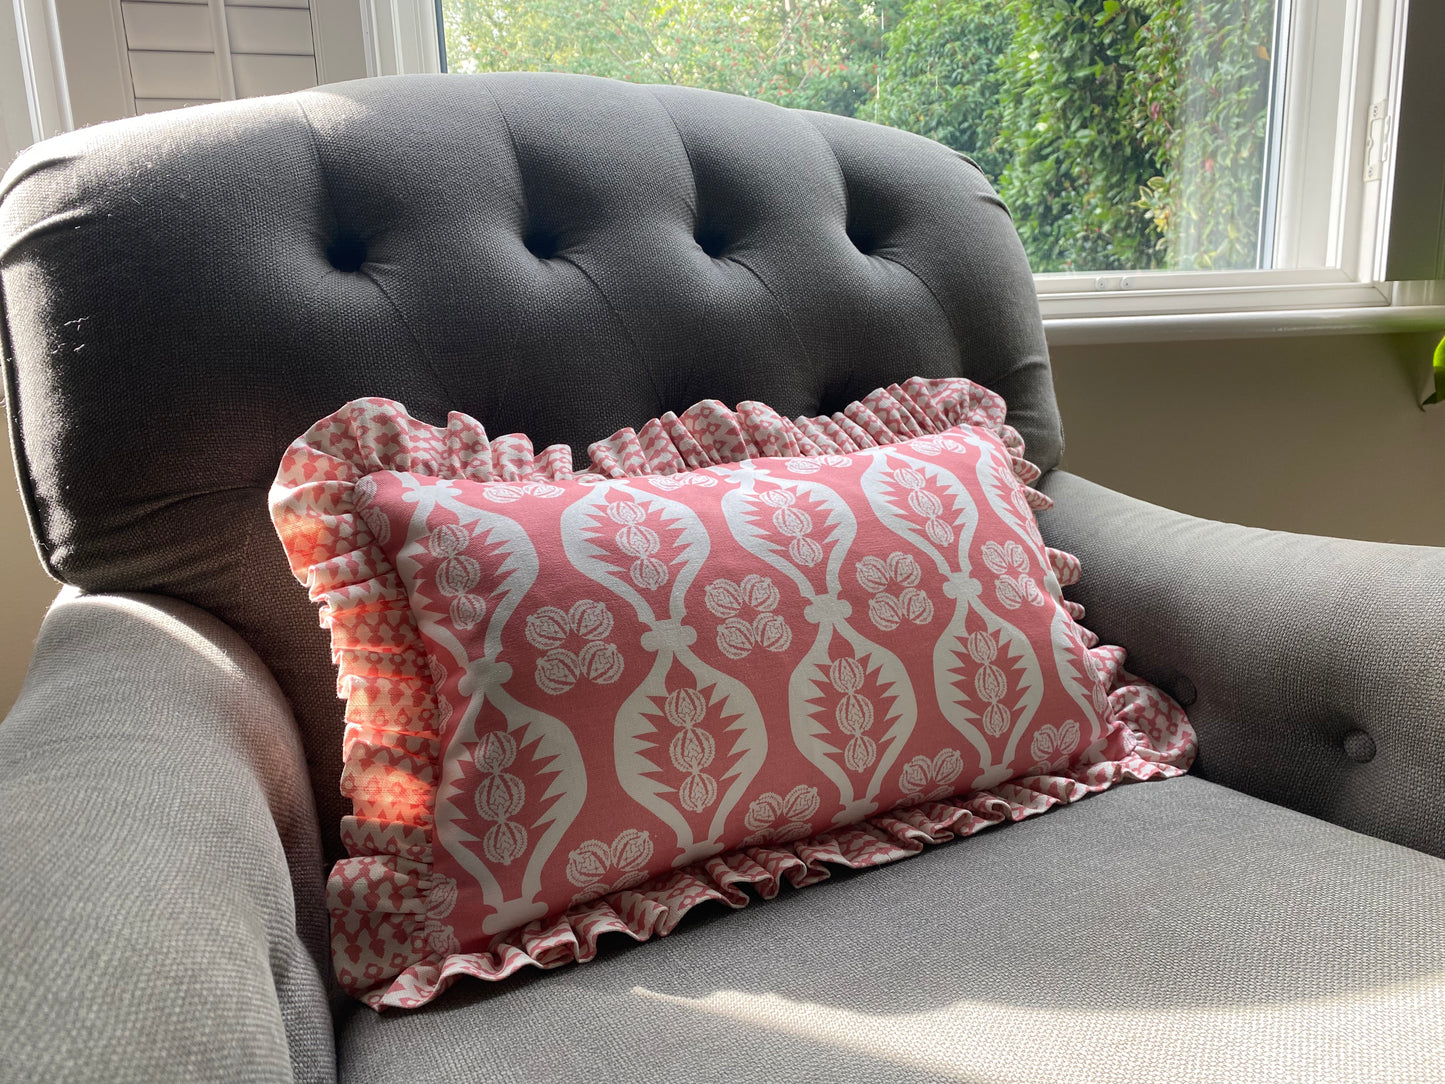 pink frilly cushion on grey chair